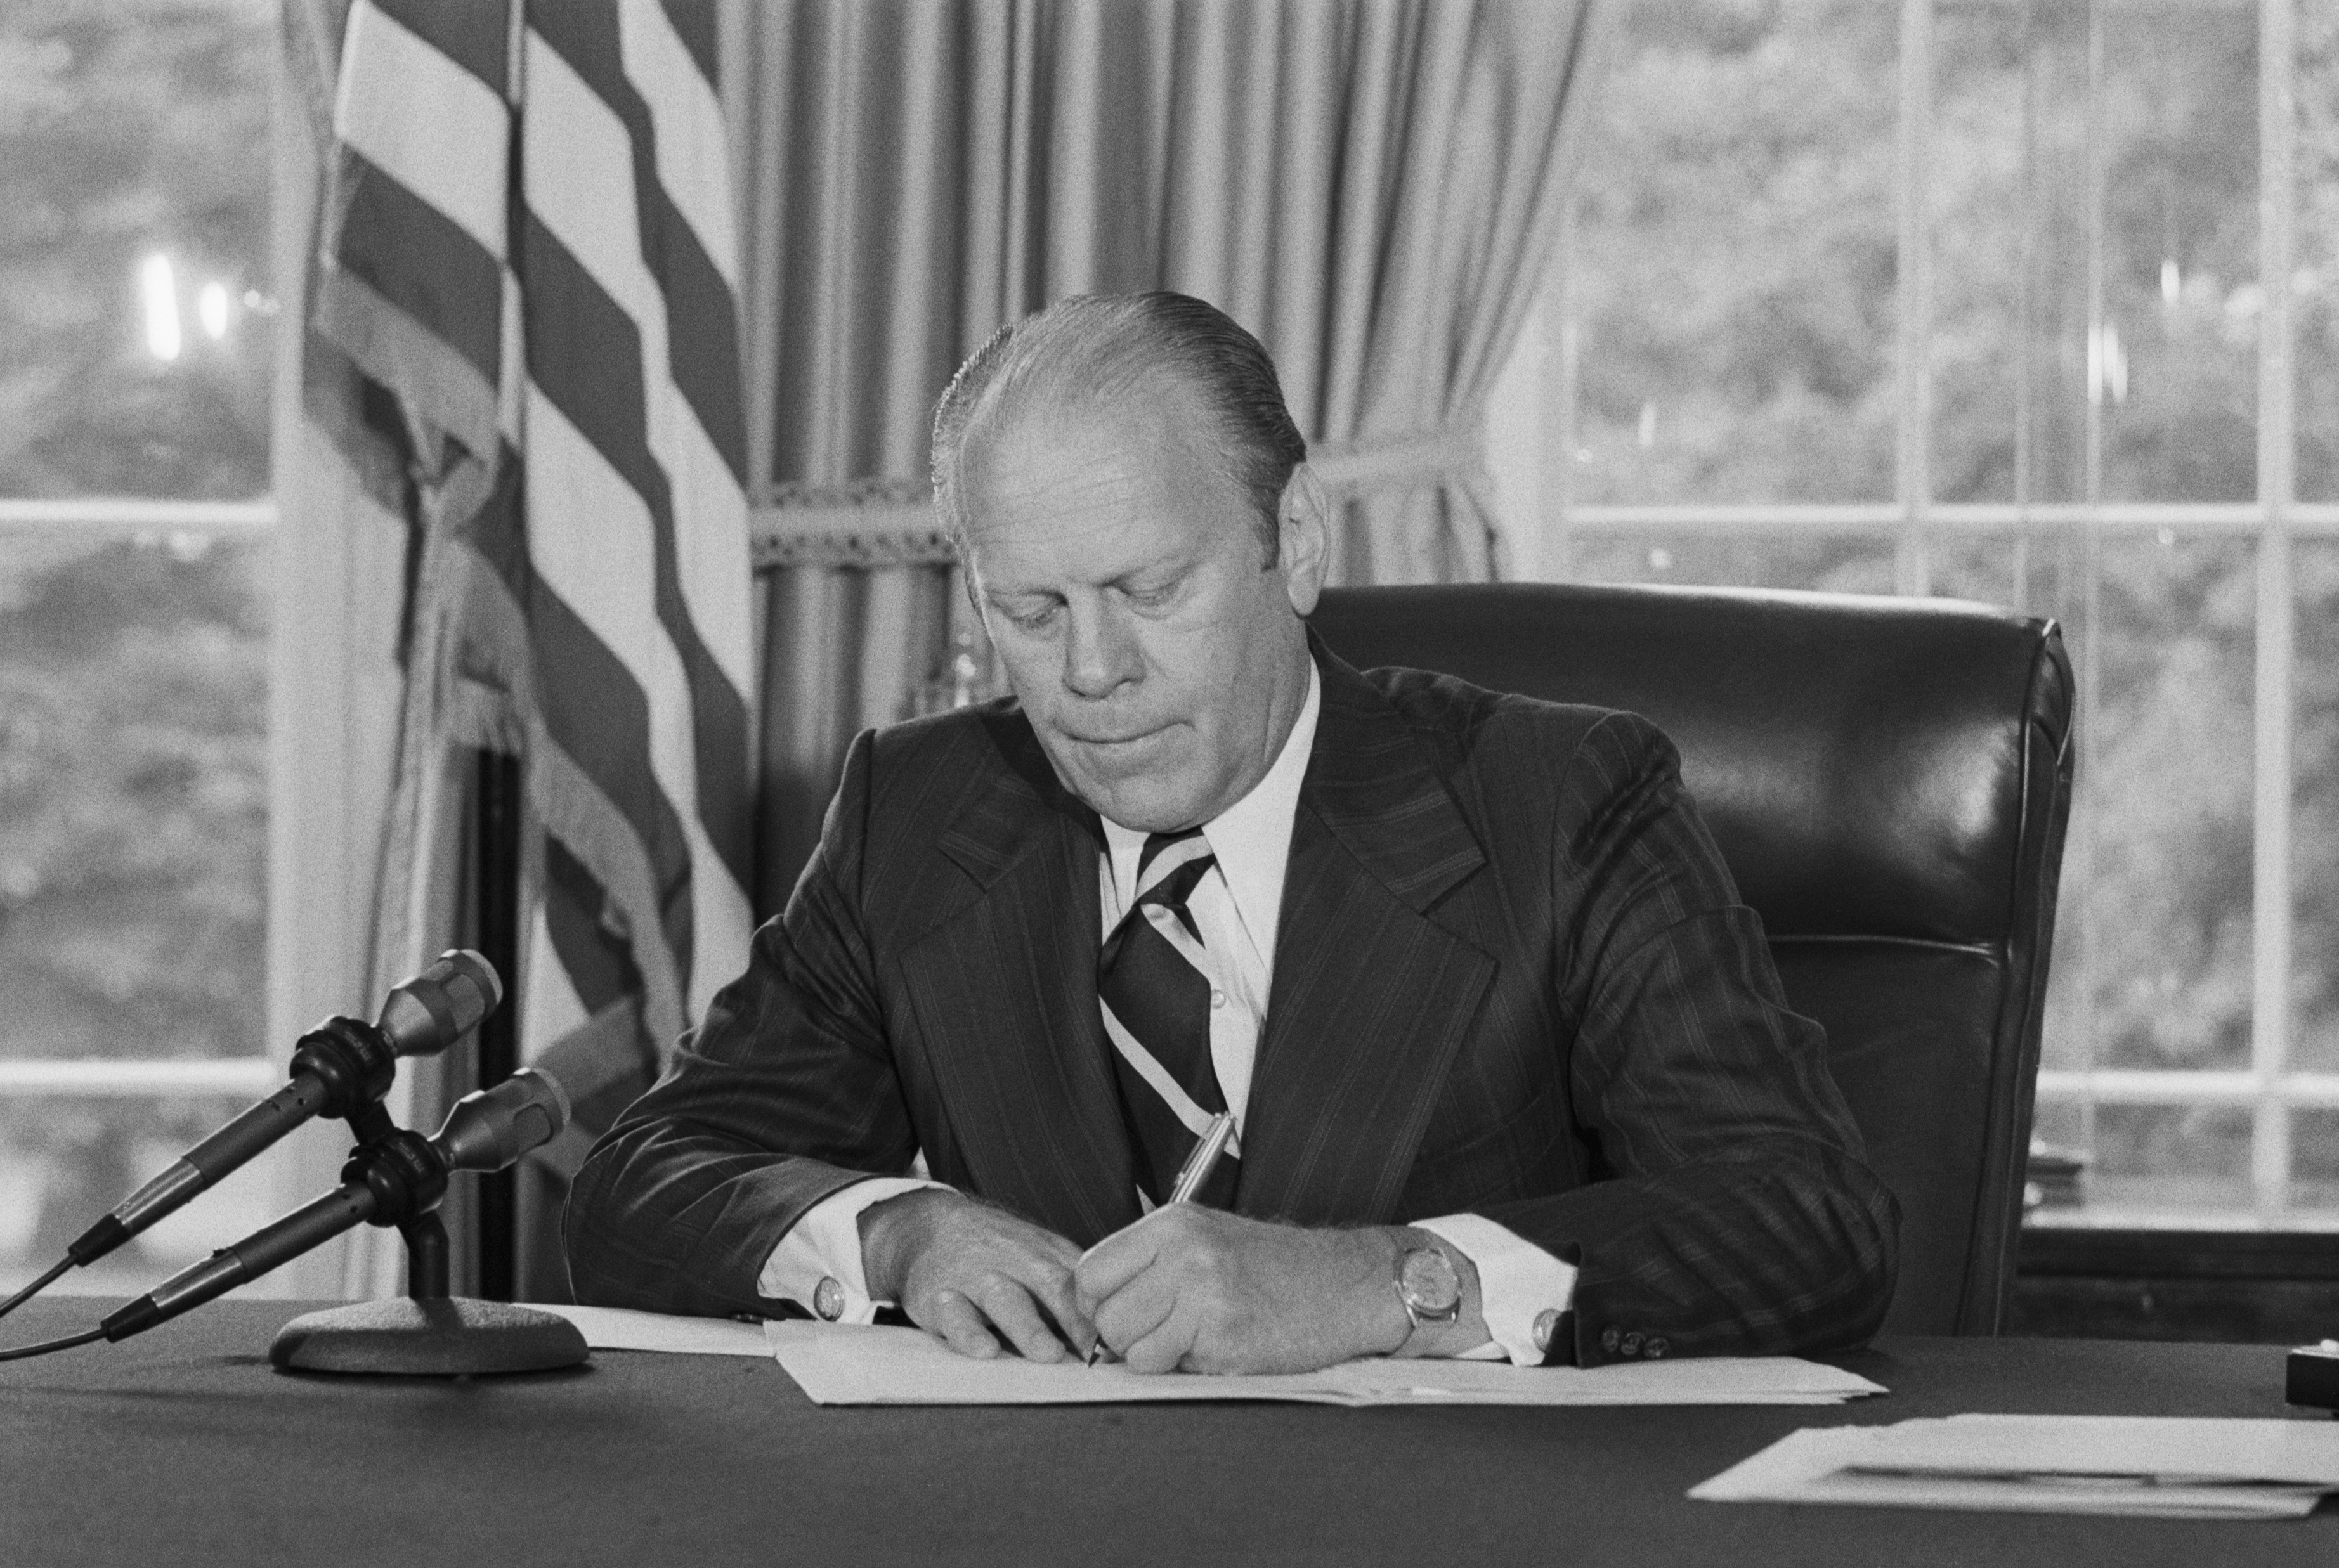 One month after Richard Nixon's resignation over the Watergate scandal, President Ford signs his pardon on Sep. 8, 1974. (Bettmann—Getty Images)